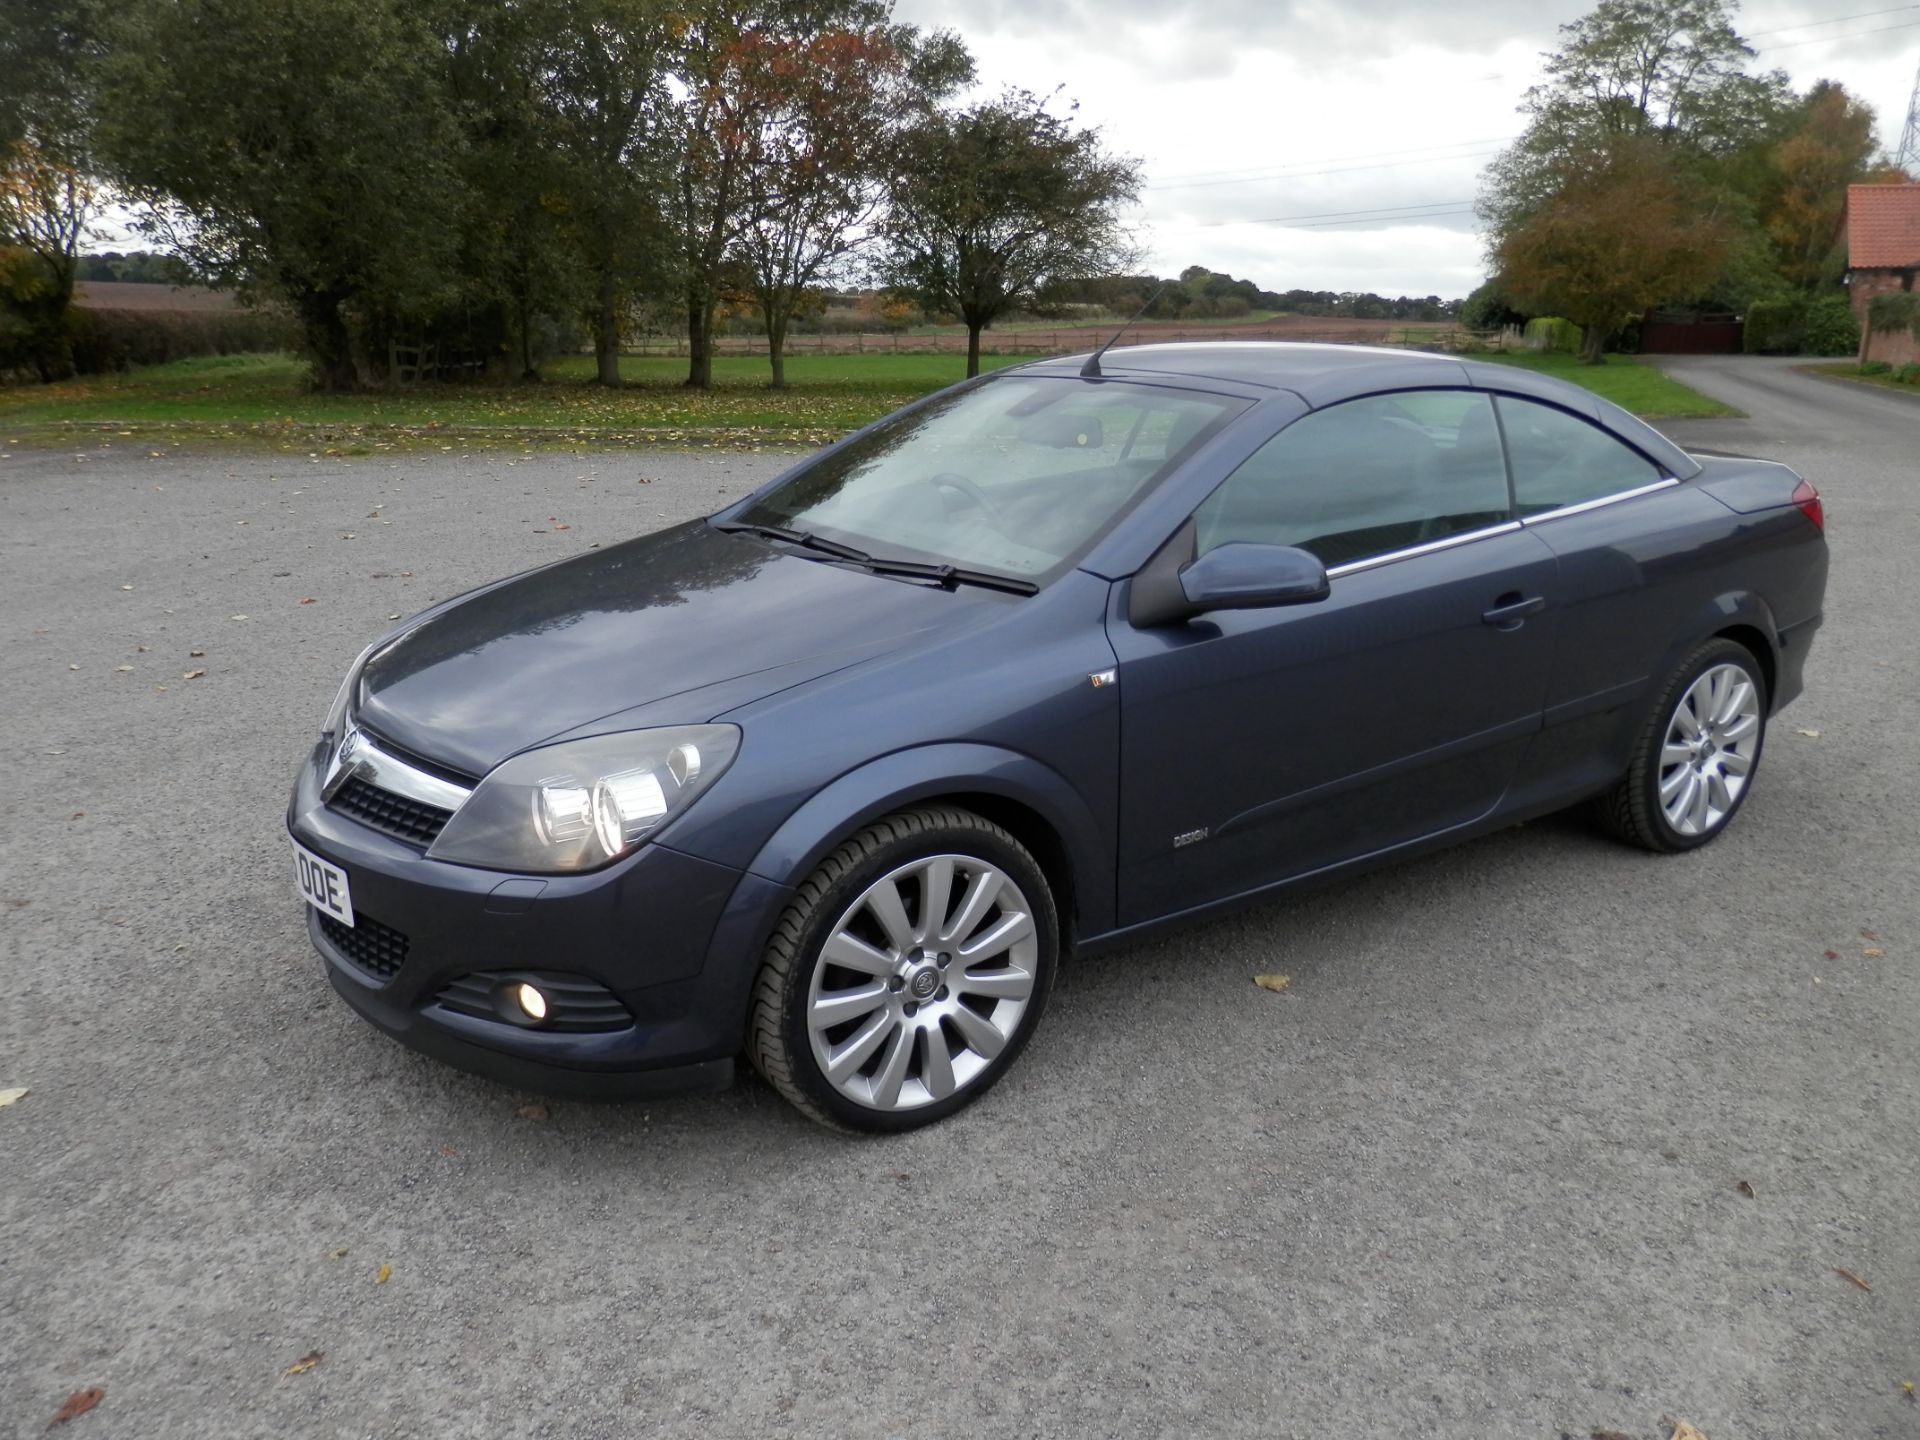 2006/06 VAUXHALL ASTRA DESIGN 1.8 SPORT TWIN TOP CONVERTIBLE, ONLY 62K MILES WARRANTED, MOT FEB 2017 - Image 7 of 24